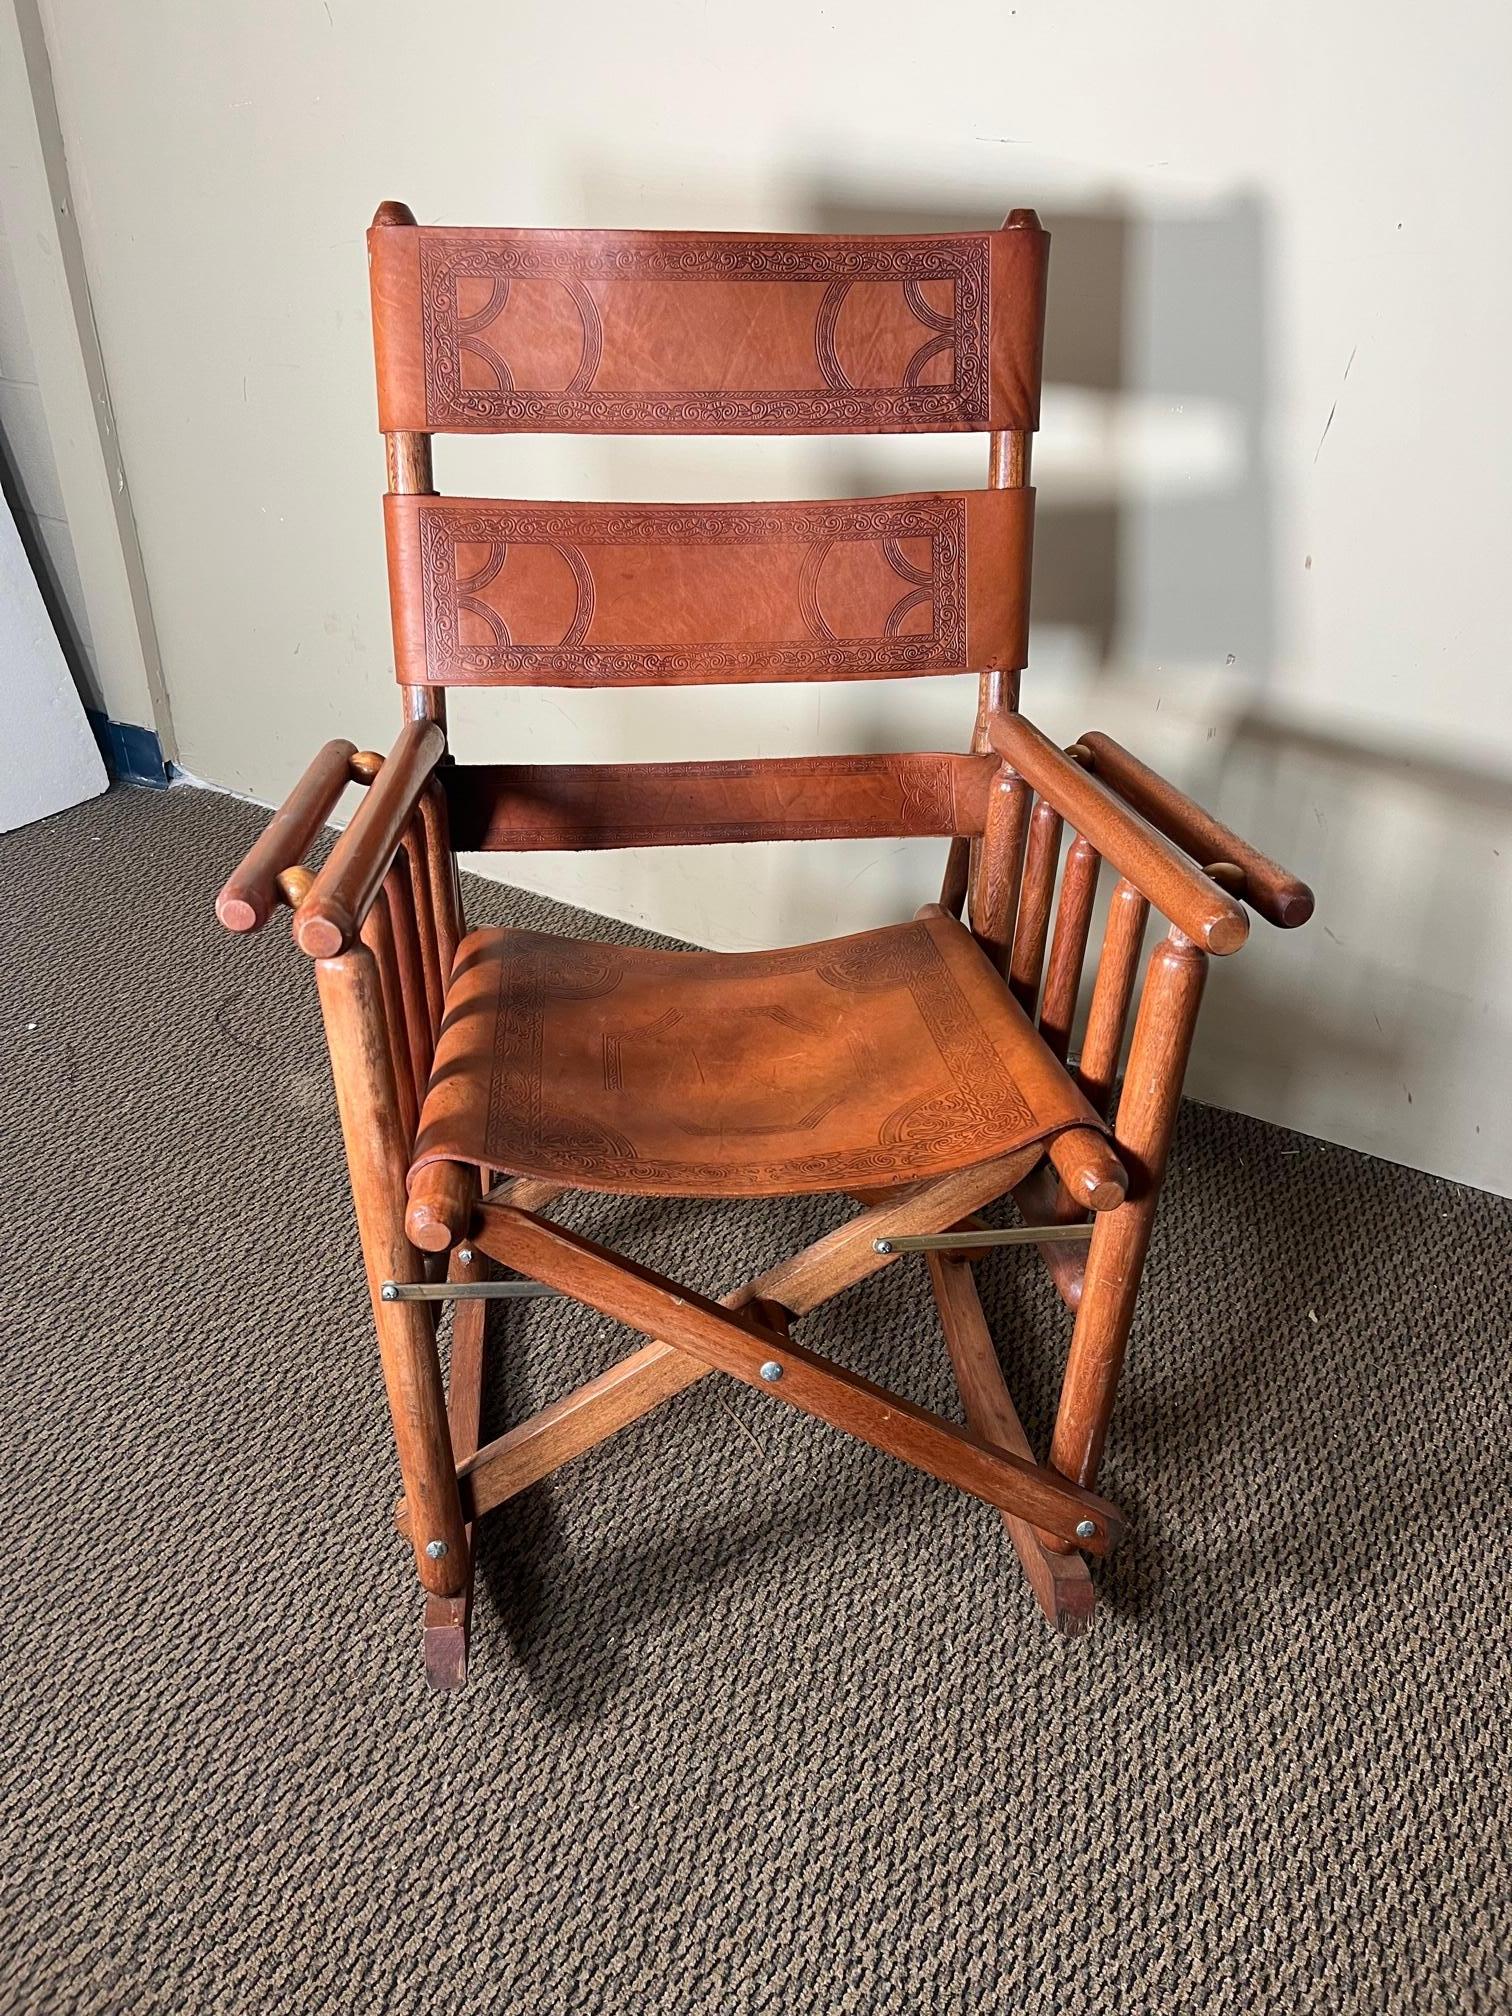 Vintage Costa Rican folding rocking chair with beautiful pattern in leather seat and back. To fold pull up the seat. Possibly made in Costa Rica. We are not able to verify where it was made.
Good unrestored vinatge condition. Has scratches, scuffs